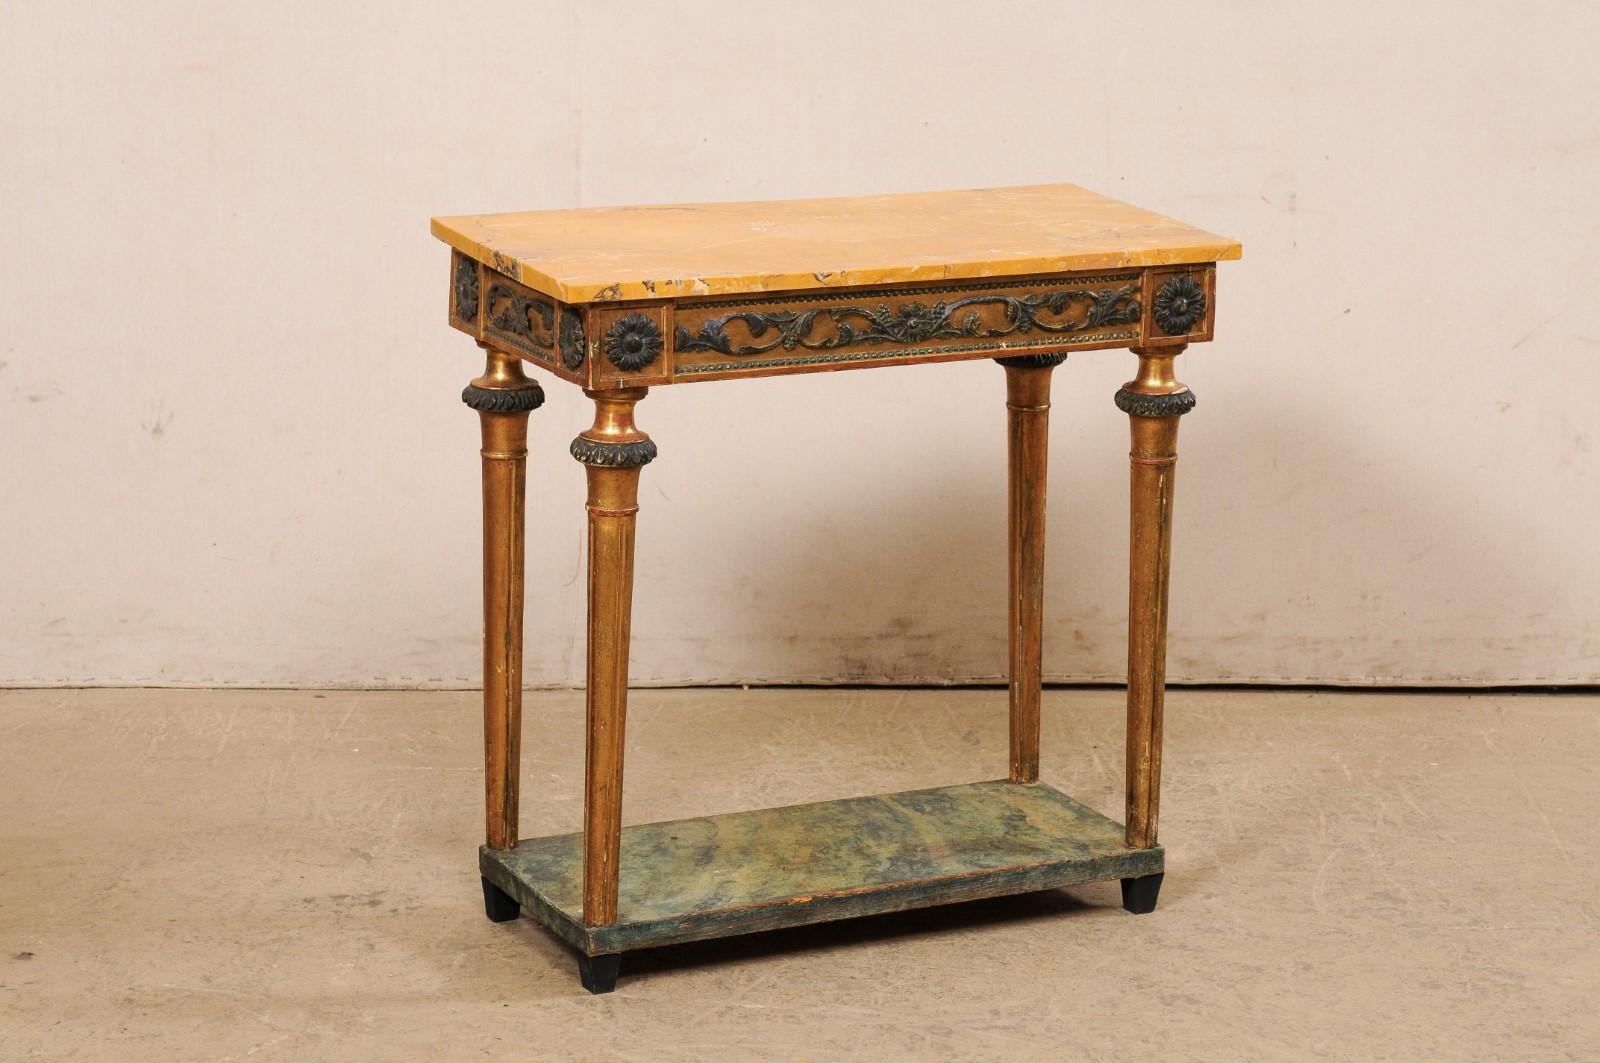 A Swedish late Gustavian petite console table, with stunning marble top and secondary platform shelf, from the late 18th to early 19th century. This smaller-sized antique table from Sweden has a particularly beautiful marble top, rectangular in